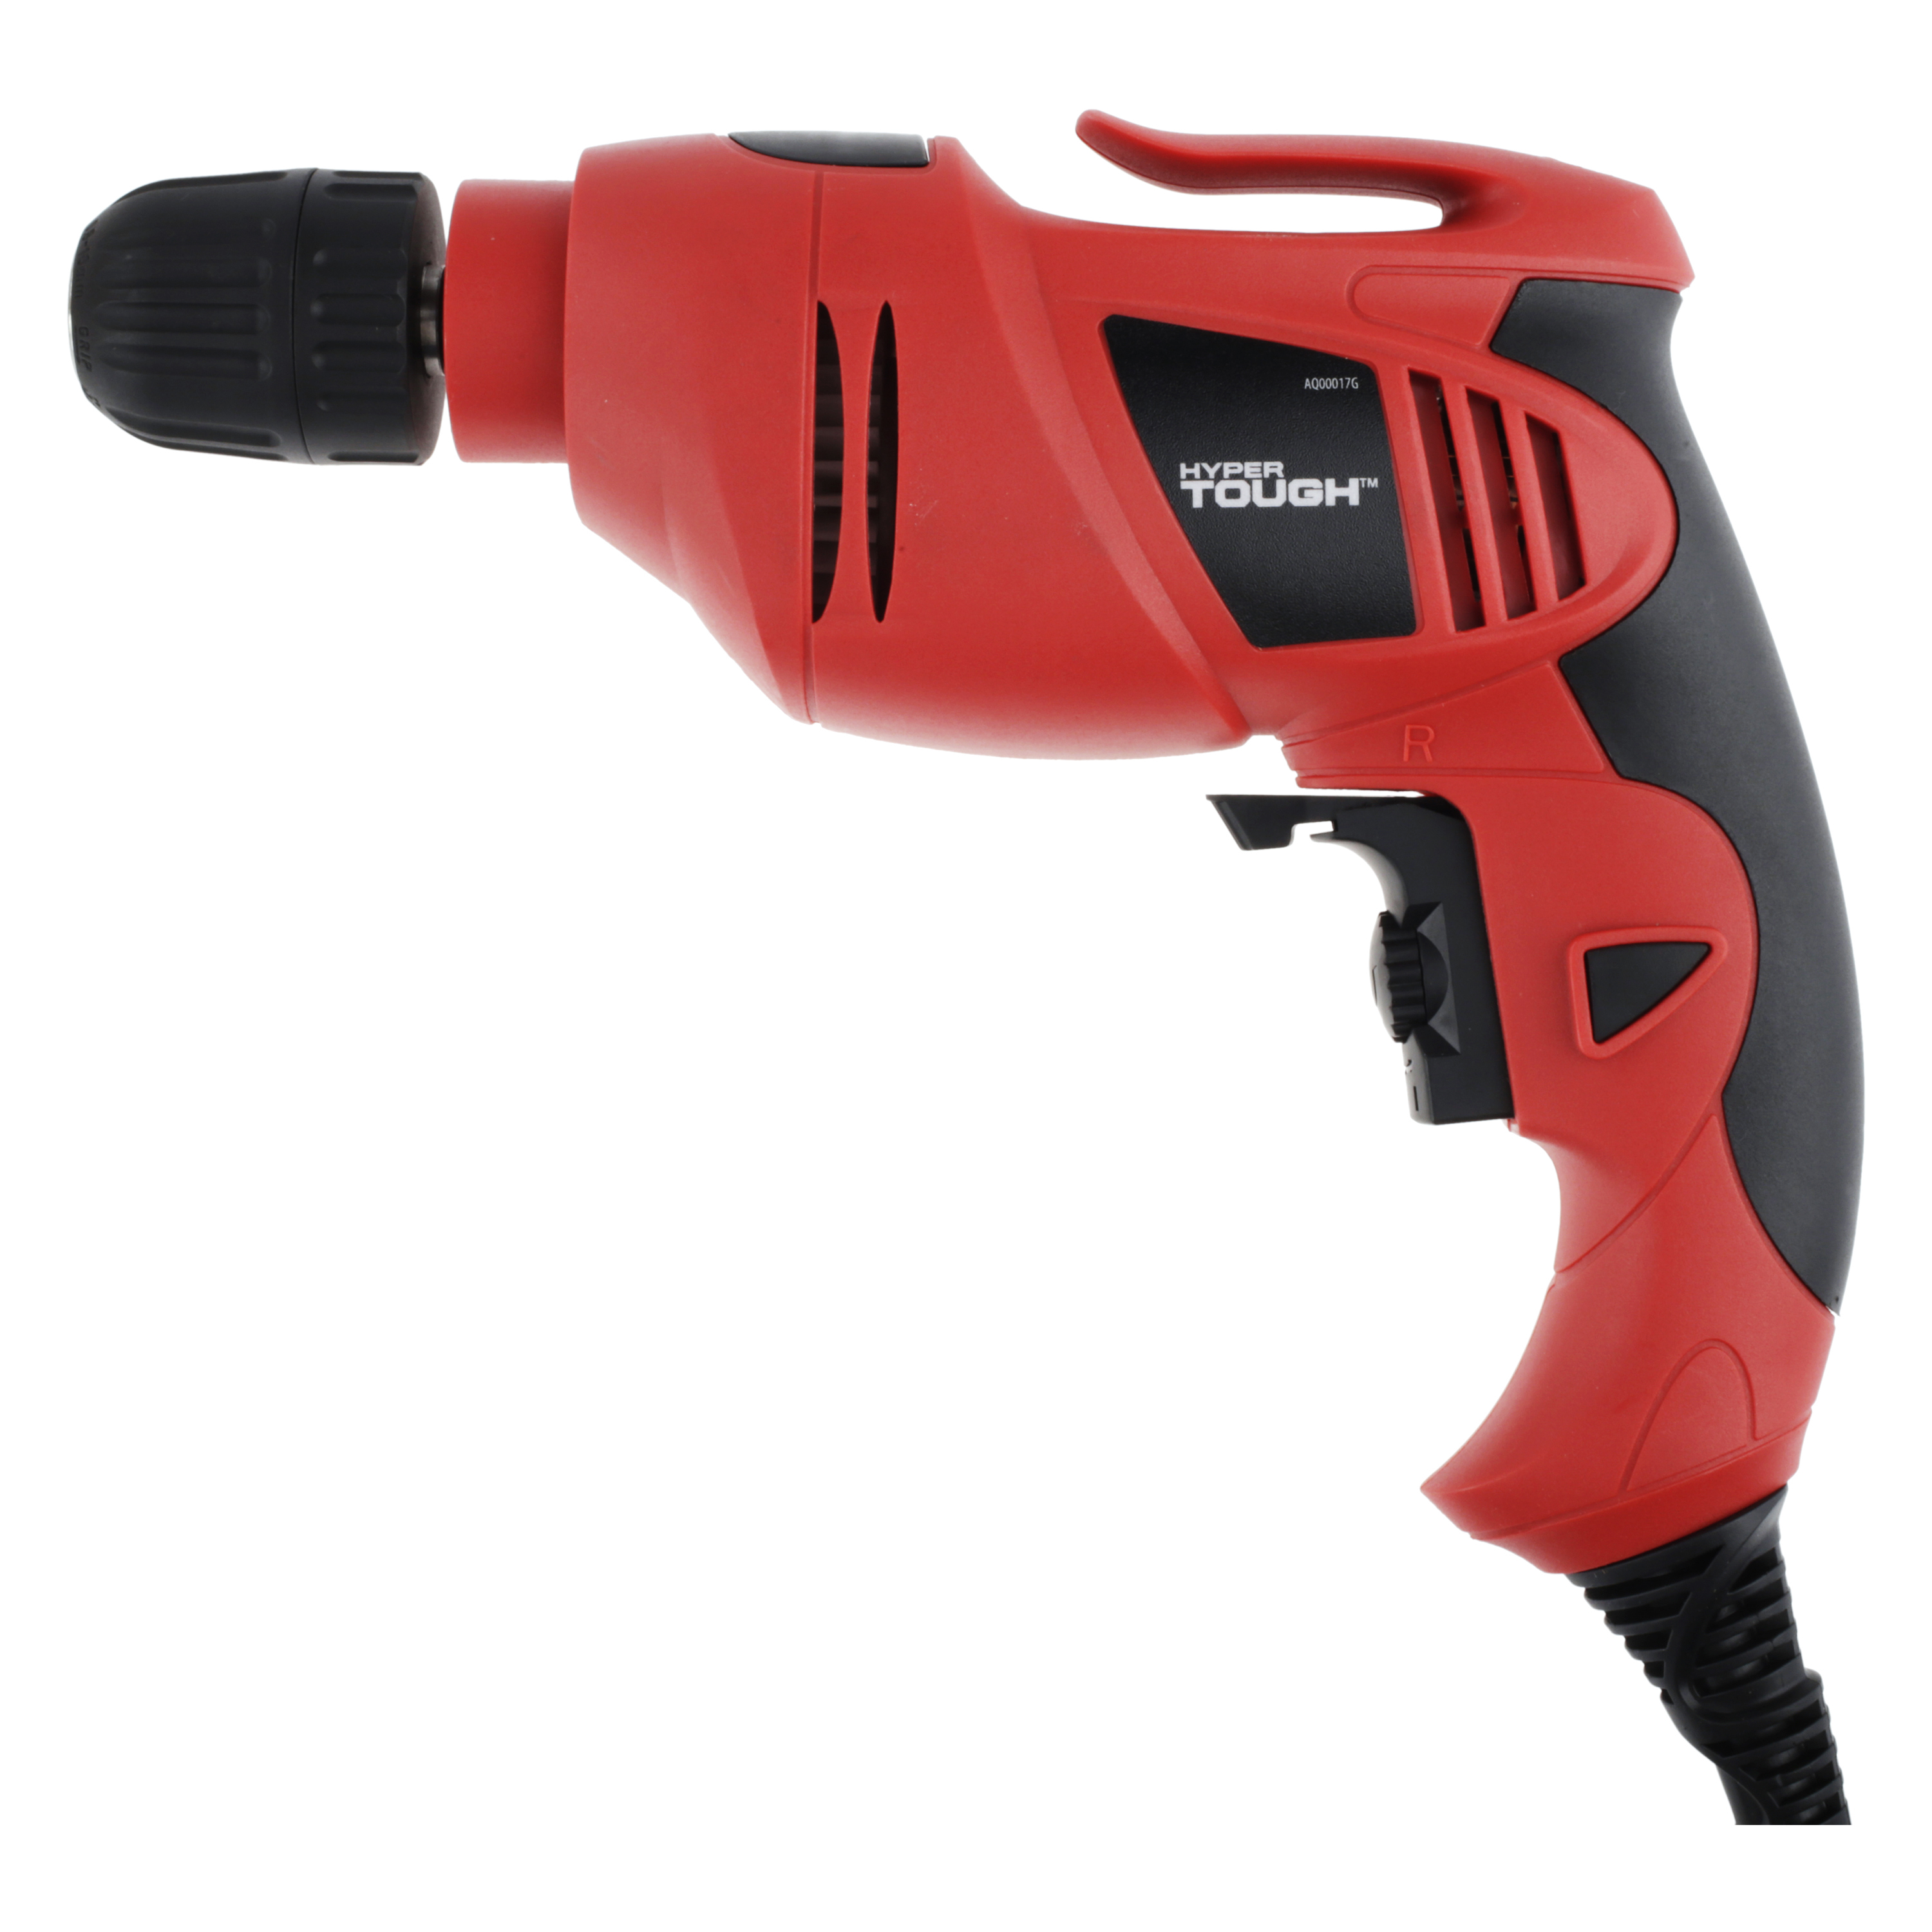 Hyper Tough 5.0 Amp 3/8 inch Corded Electric Drill Now $10 (Was $25)